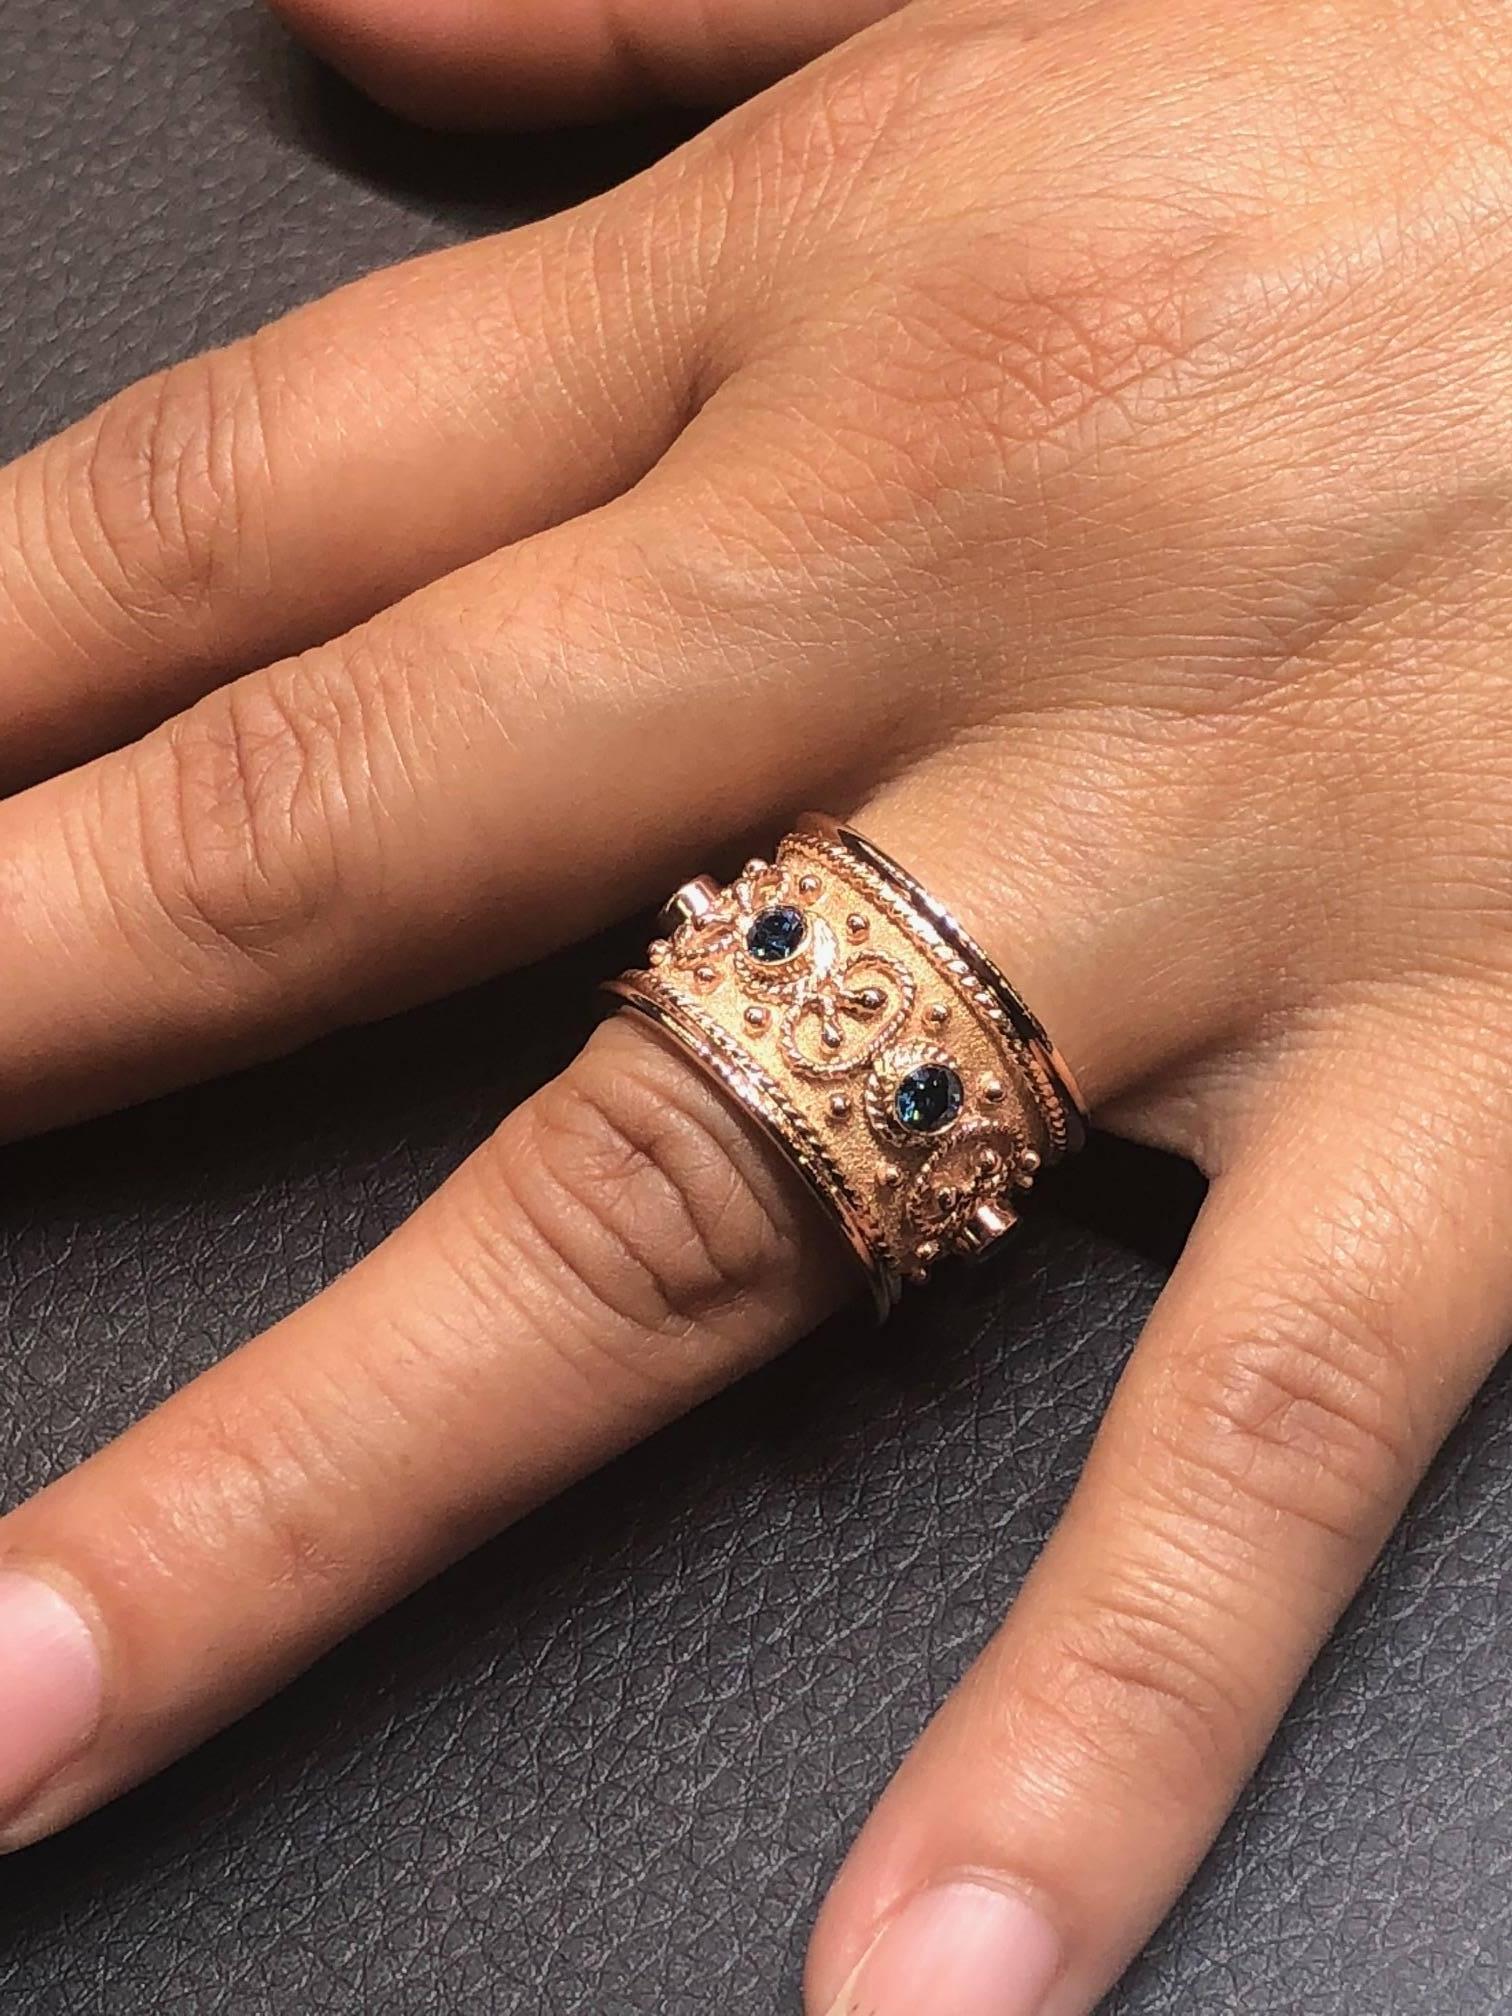 S.Georgios Special Edition Hand Made 18 Karat Rose Gold Ring with 0.68 Carat Blue Diamonds. The ring is microscopically decorated all the way around with gold beads and wires - granulation - shaped like the last letter of Greek Alphabet - Omega,